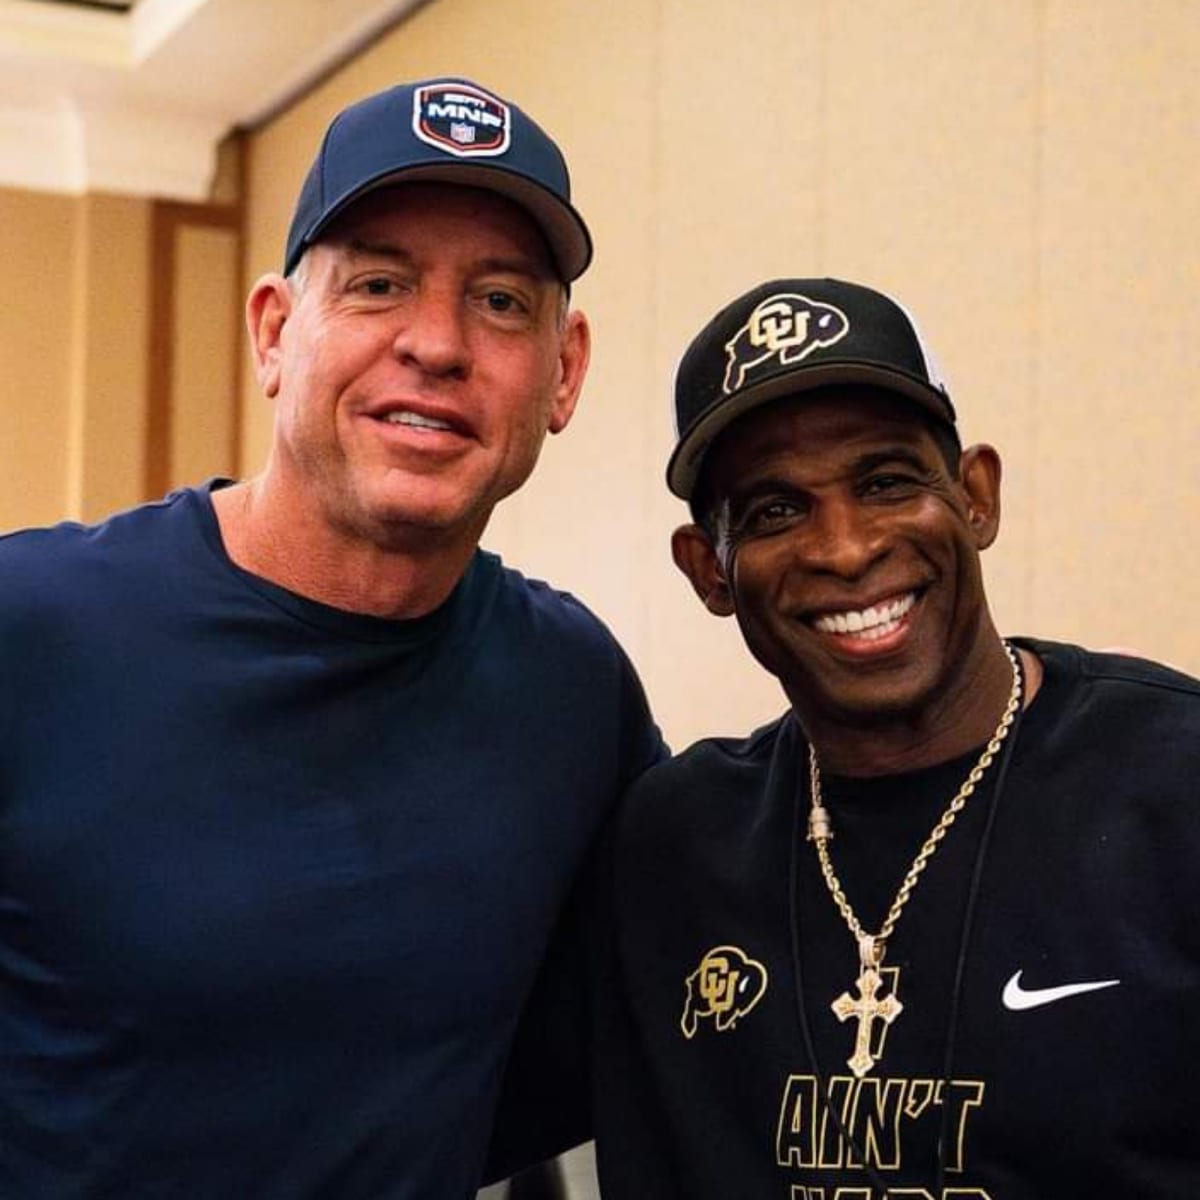 WATCH: Troy Aikman's interview with Deion Sanders on ESPN College